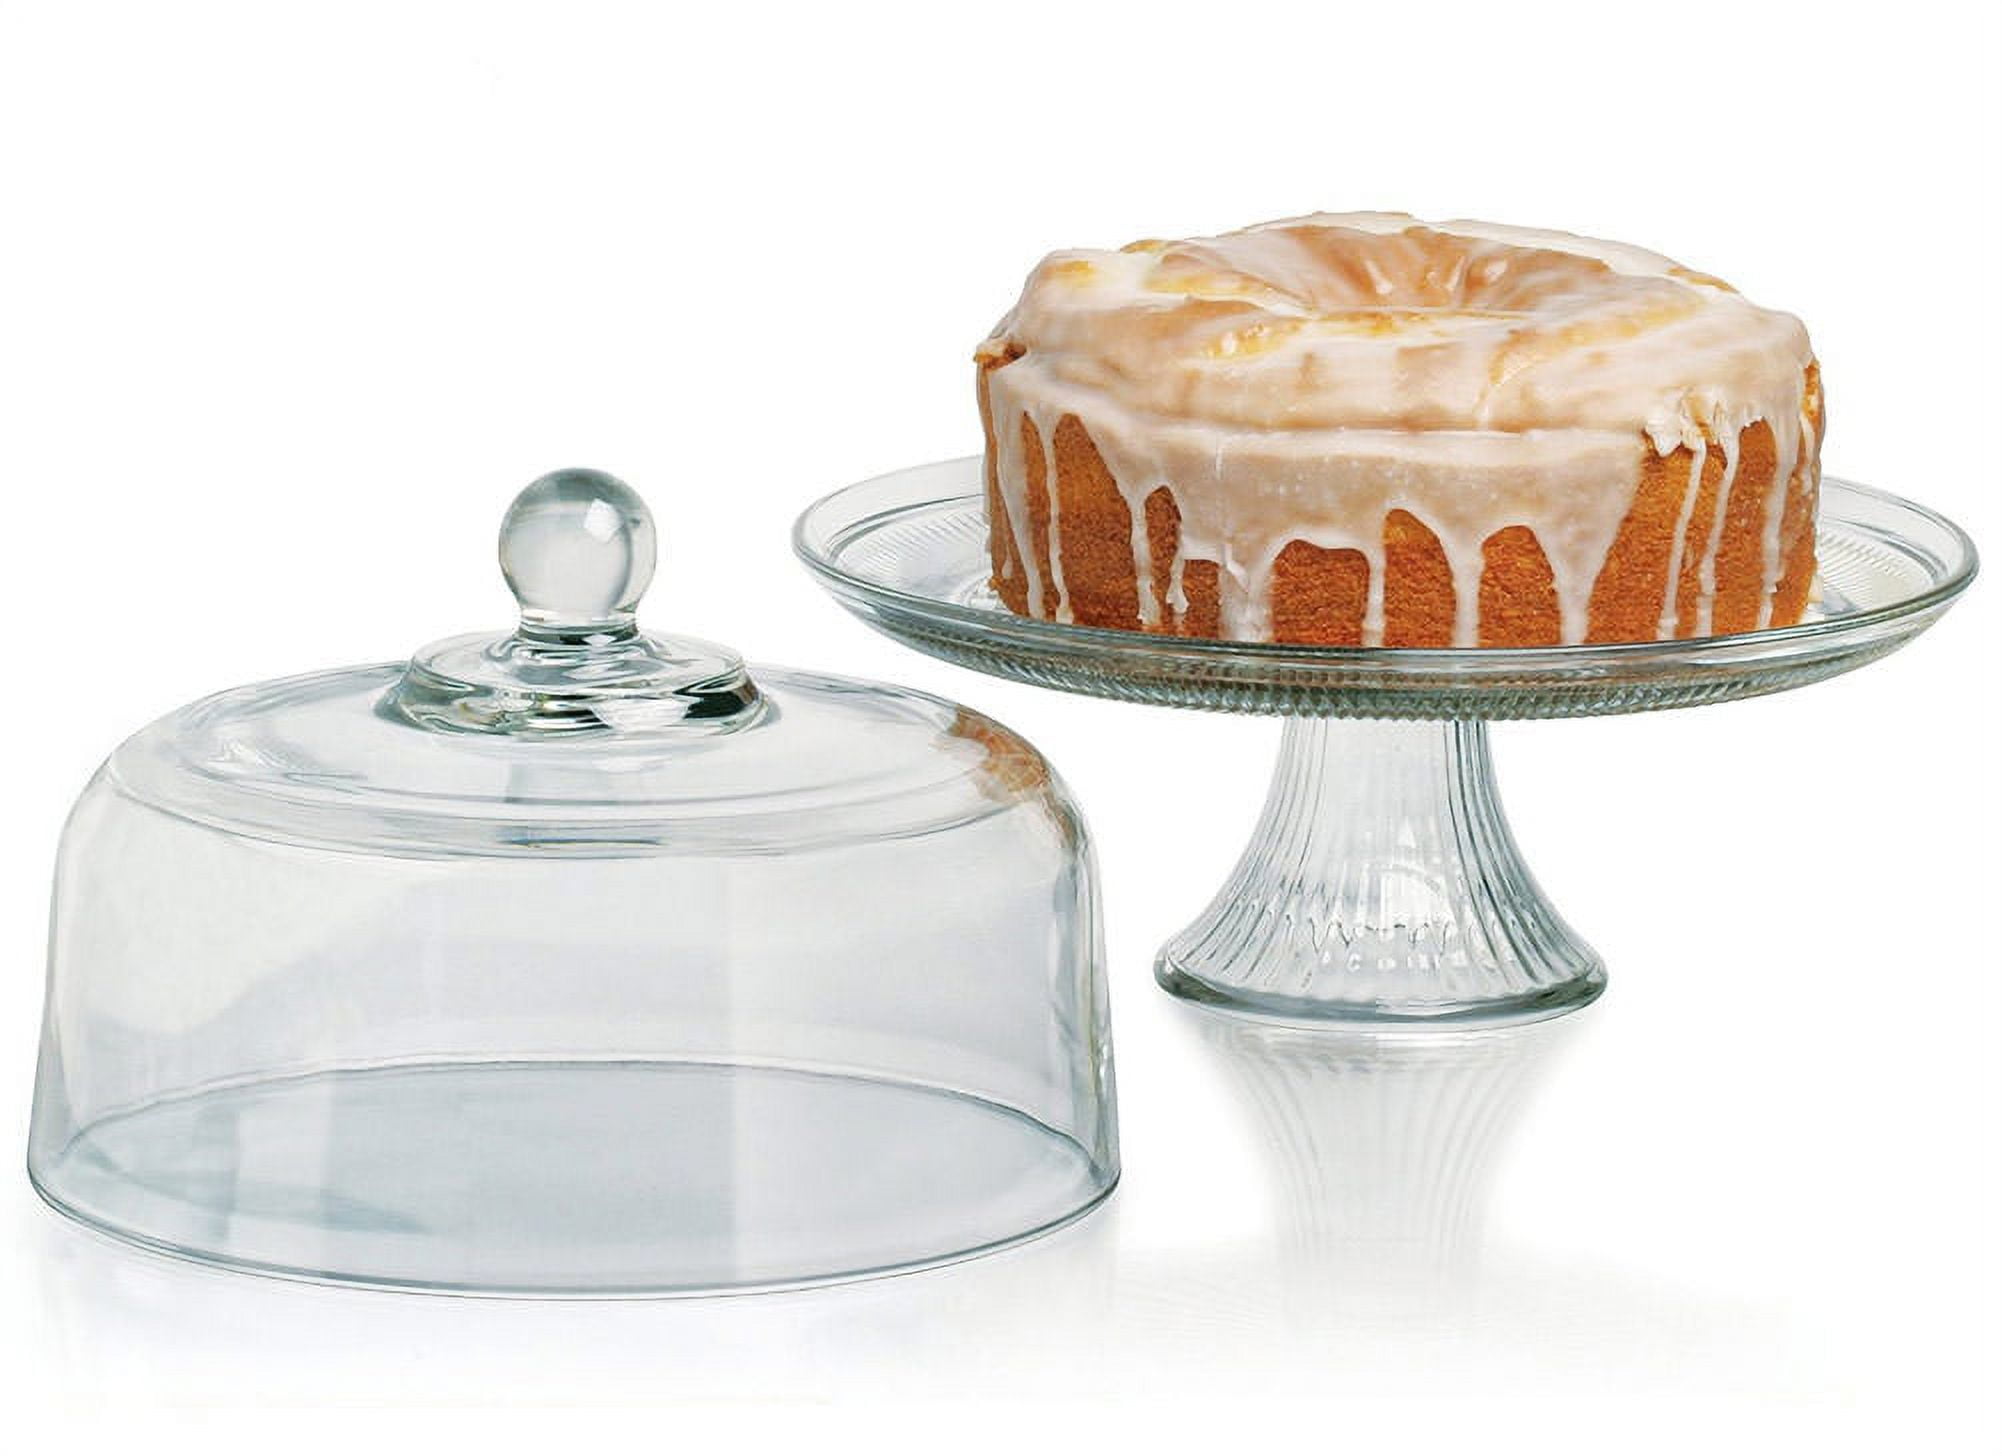 Shopping for Cake Stands - The New York Times